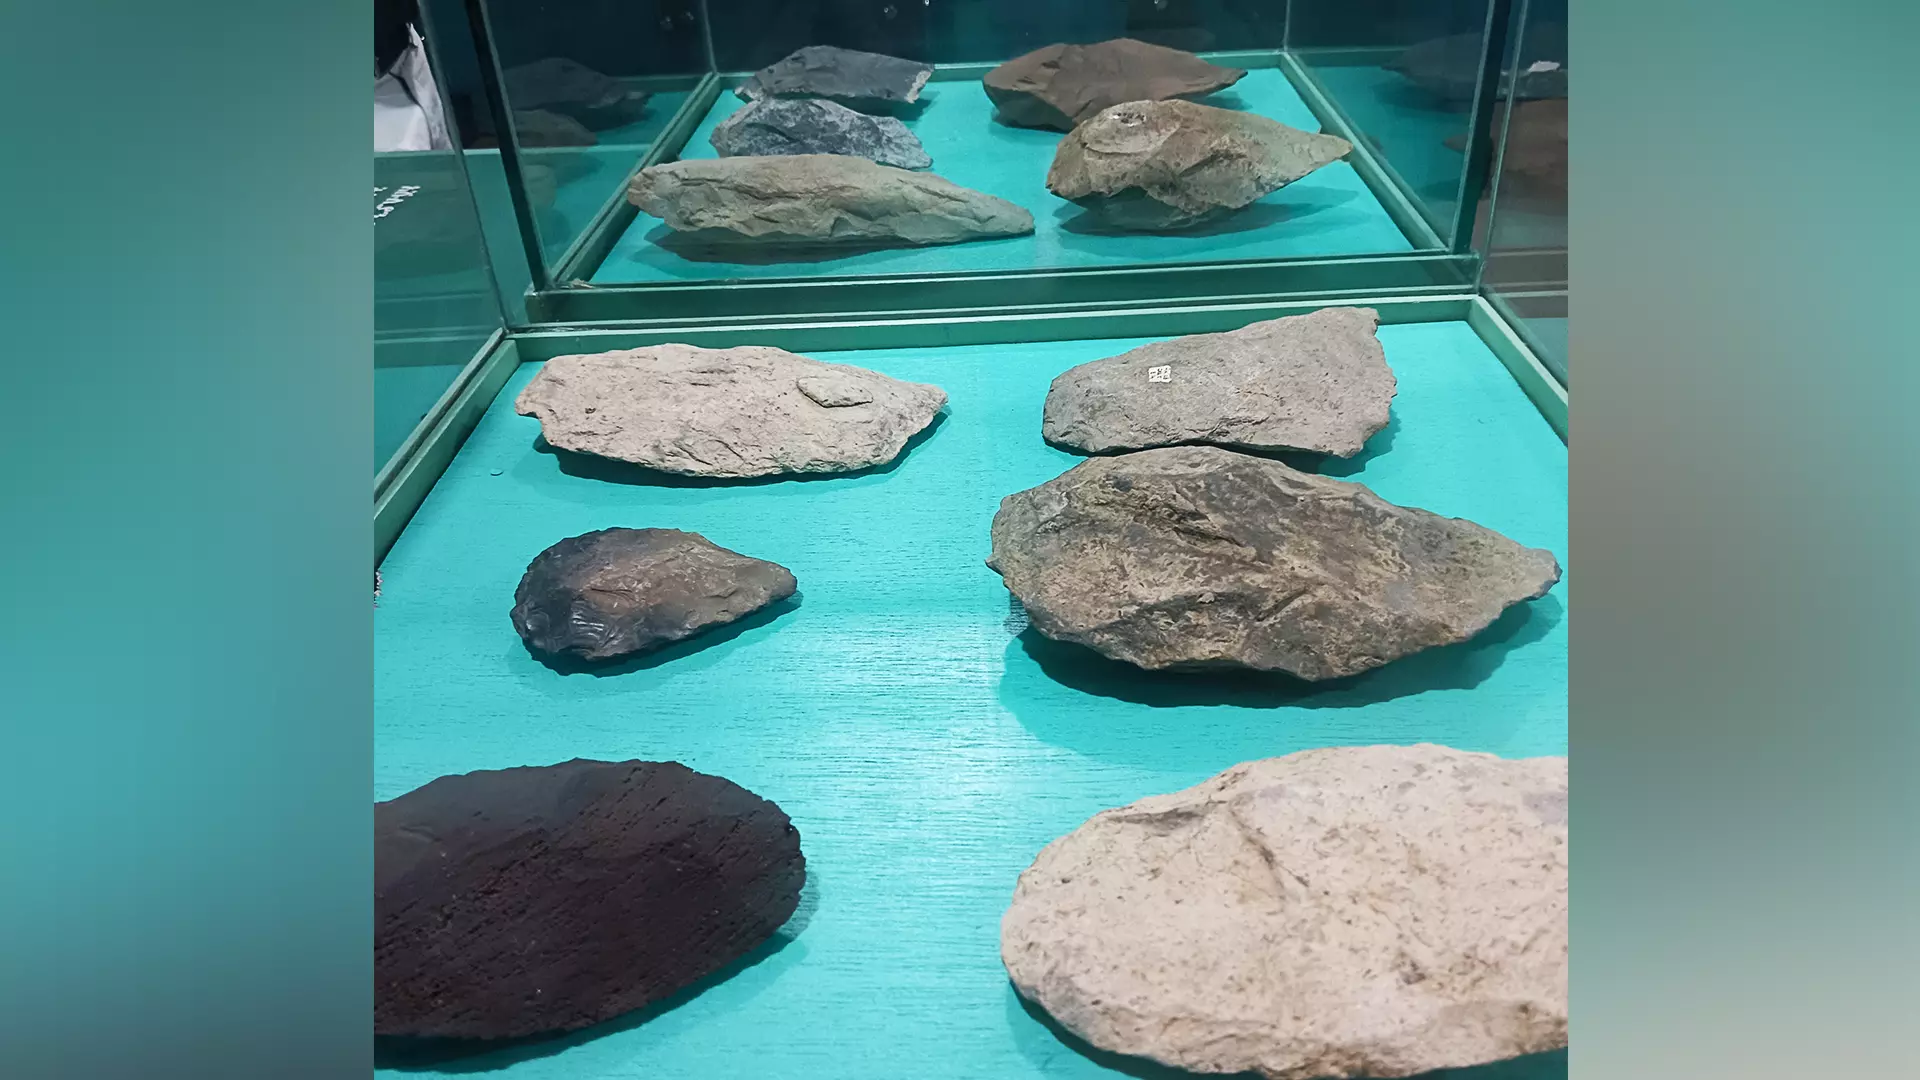 The National Museum of Ethiopia maintains a fabulous collection of stone tools from prehistoric era.